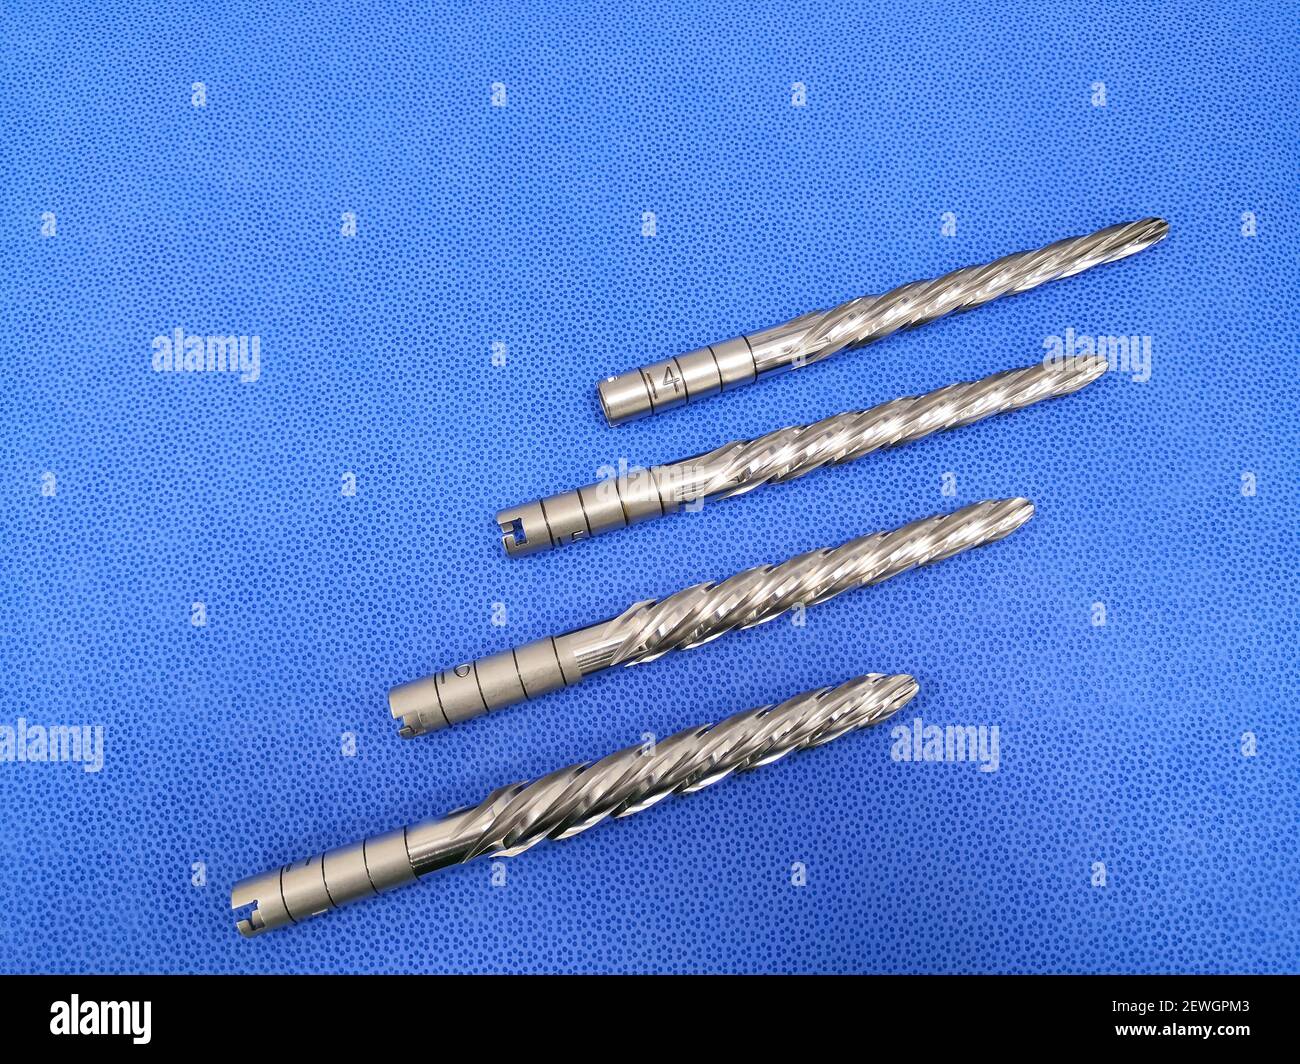 Orthopaedical Instrument Surgical Drill Bit. Selective Focus Stock Photo